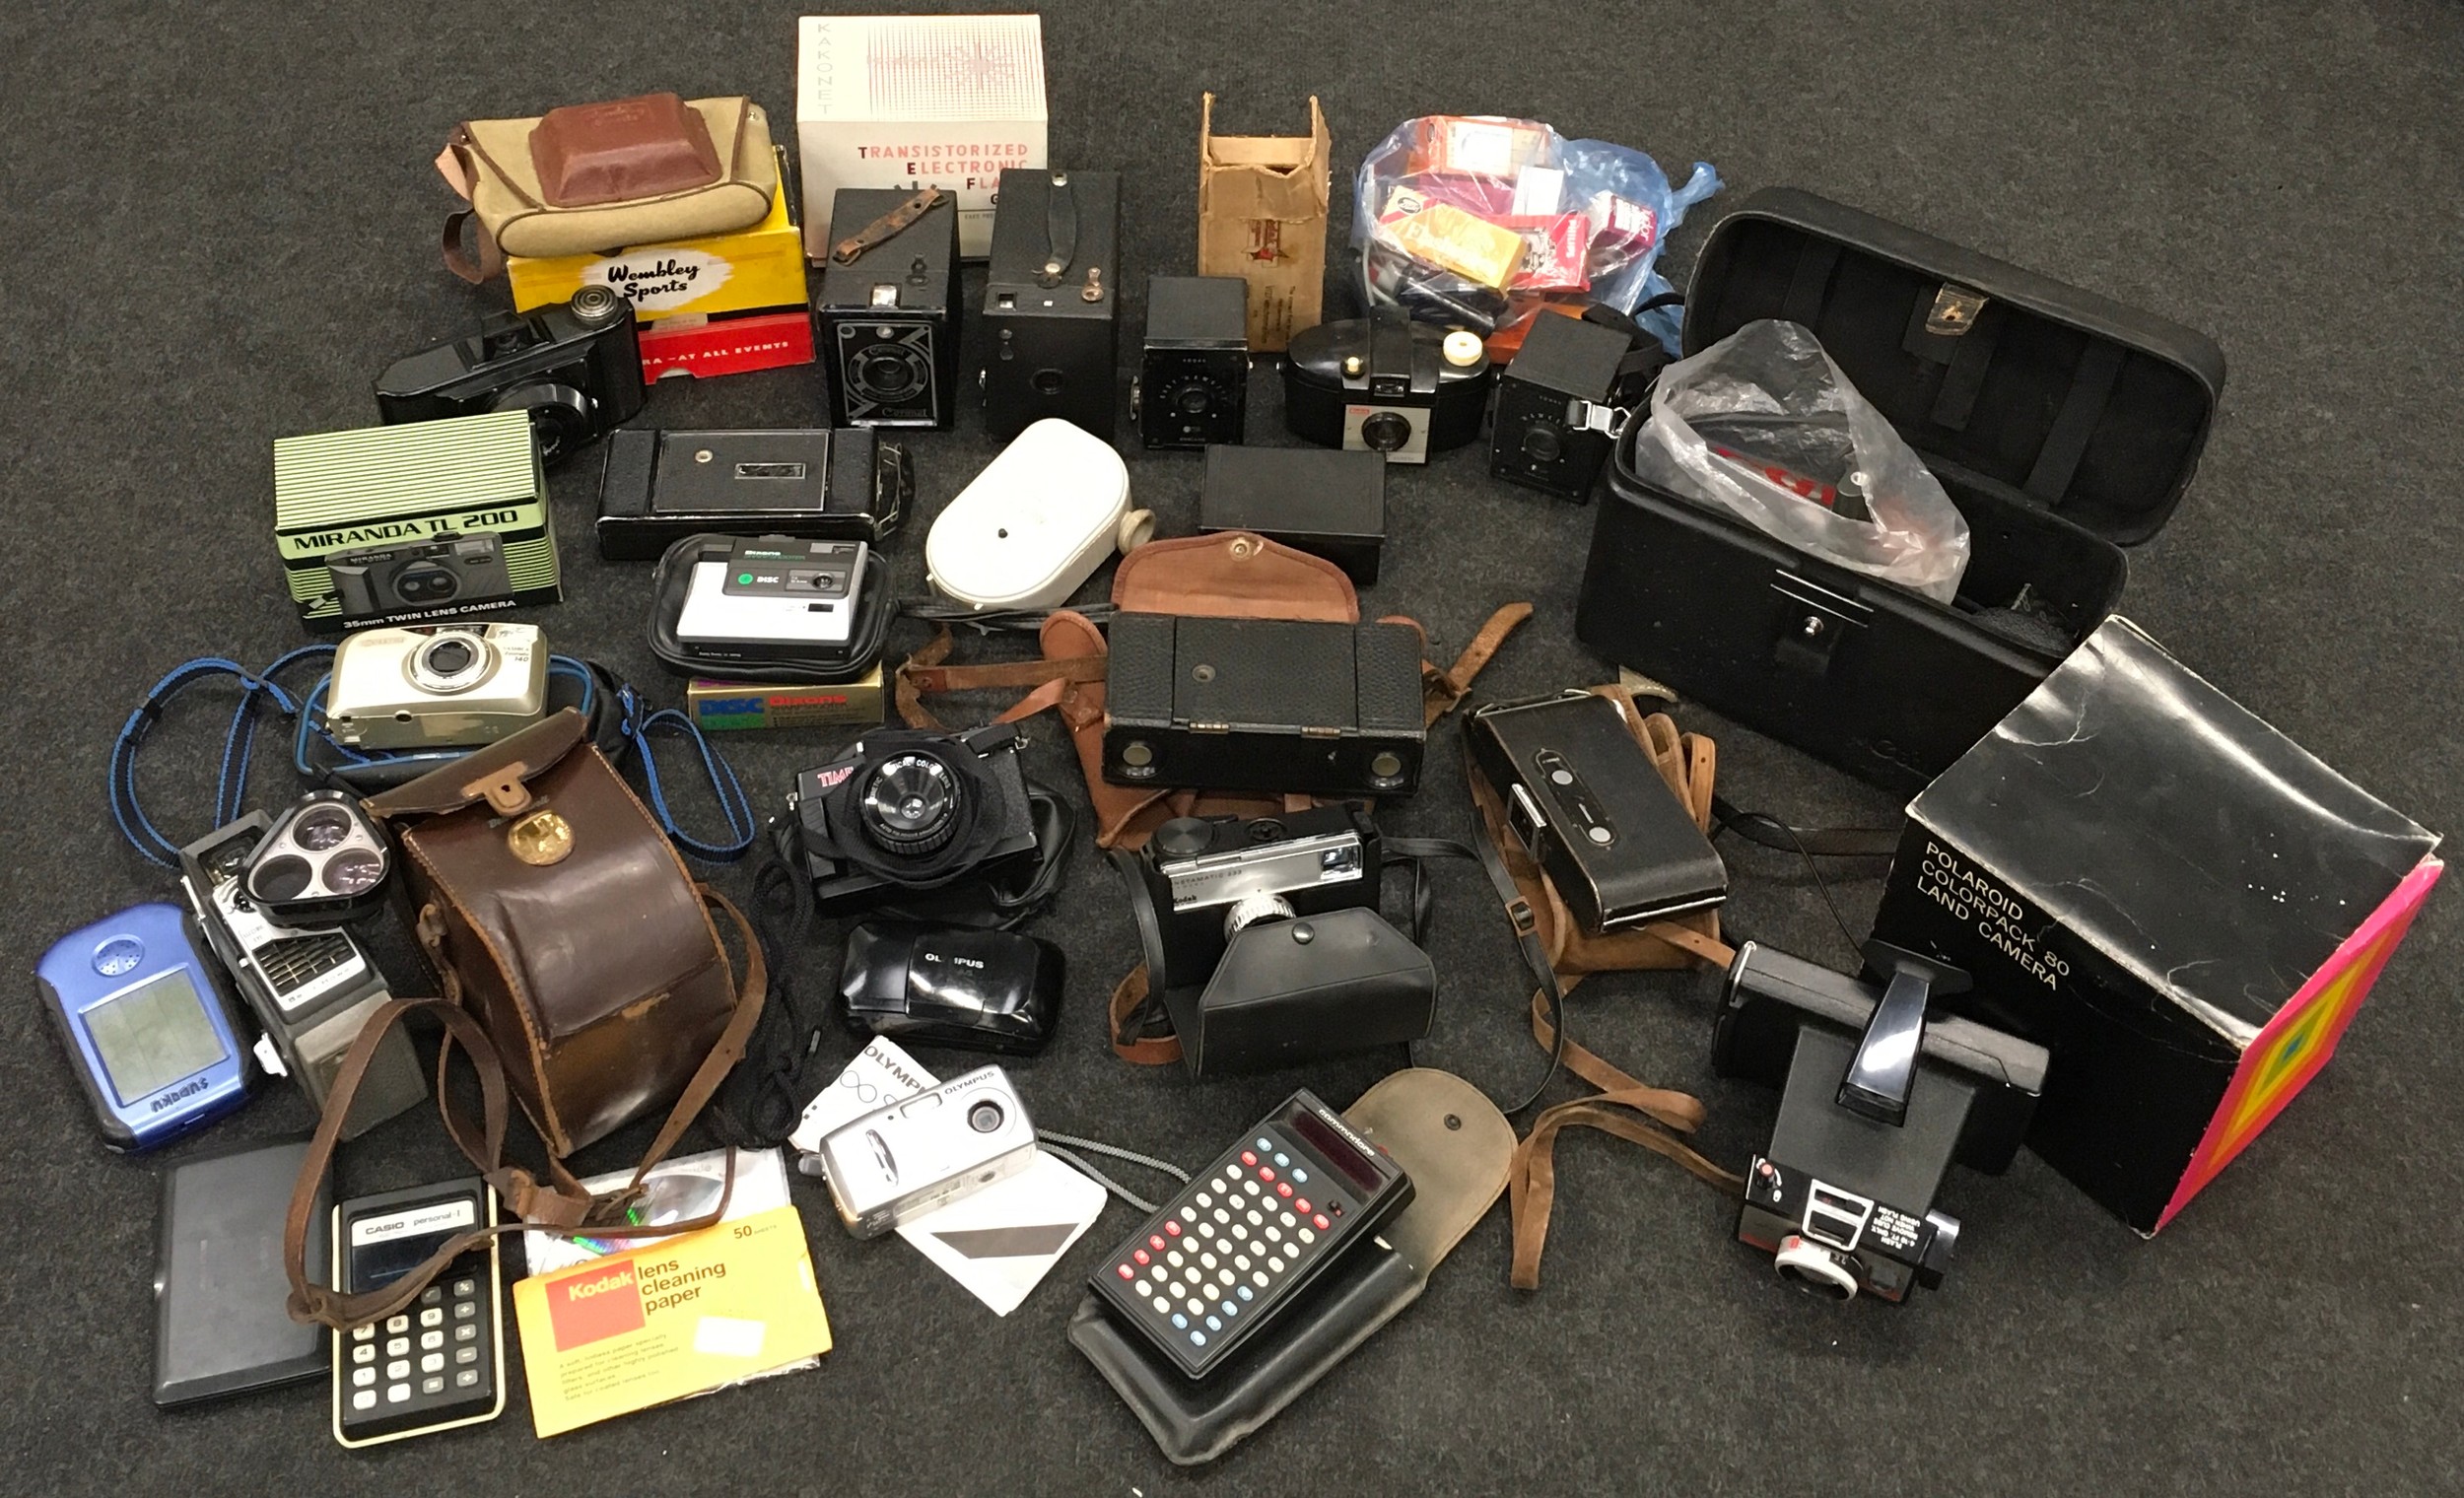 Large collection of vintage cameras, camera equipment and cine cameras to include Olympus, Kodak